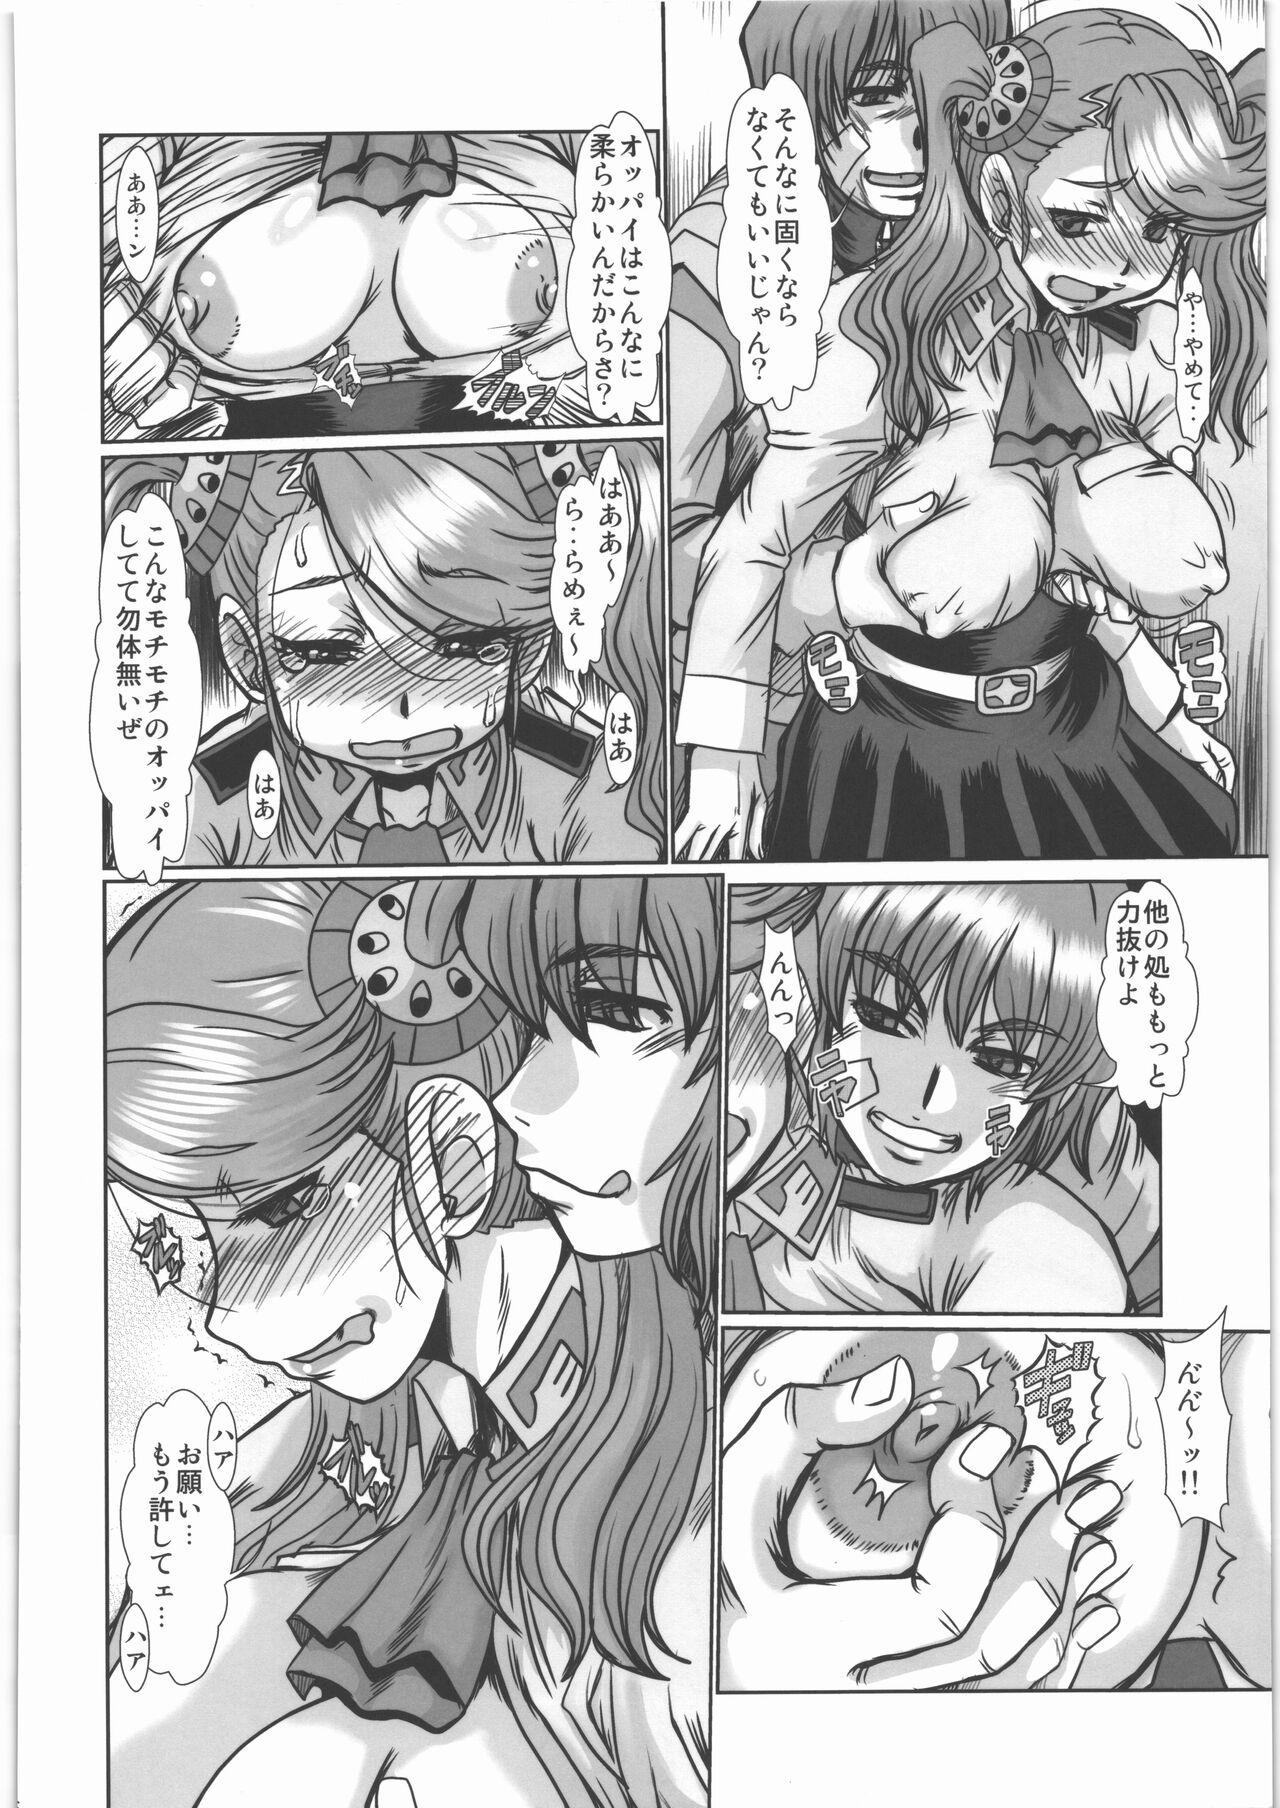 Best Blowjob Ever F-84 - Gundam build fighters try Tied - Page 5